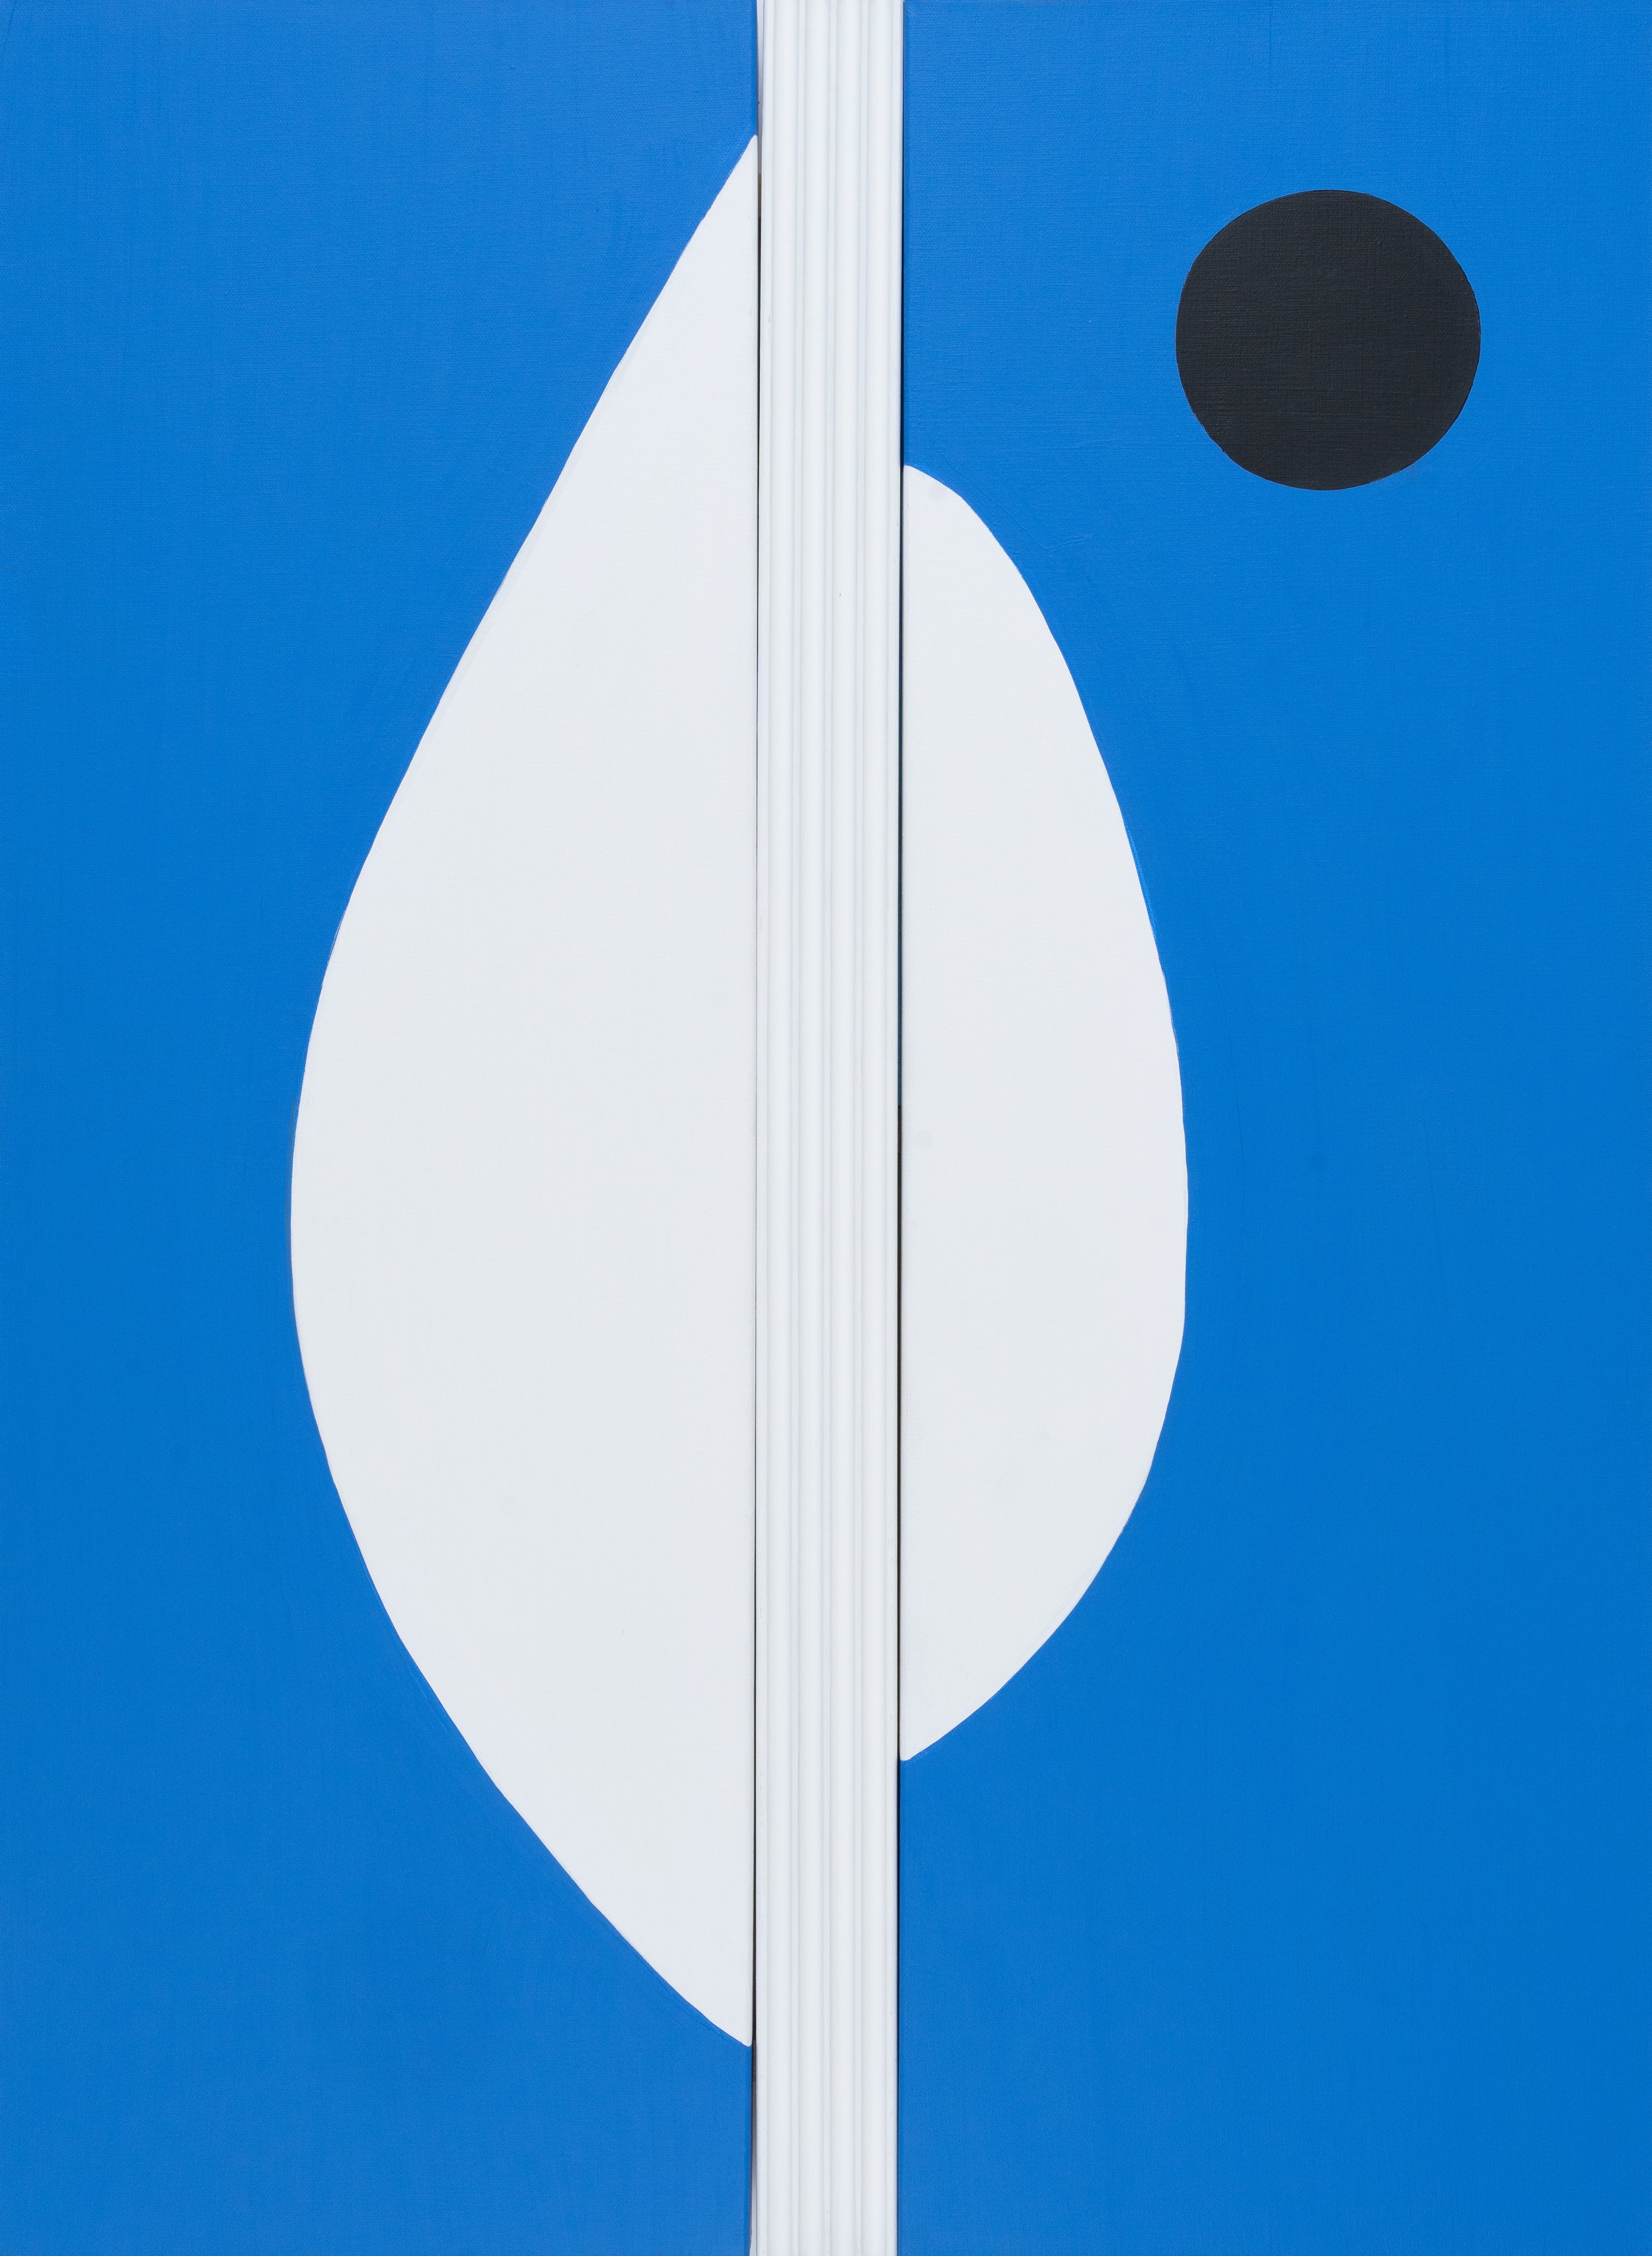 Desert Botanical Series II Stargazer Lily Pods (Blue and White), 2022, acrylic on canvas and wood, 36x26.5 inches